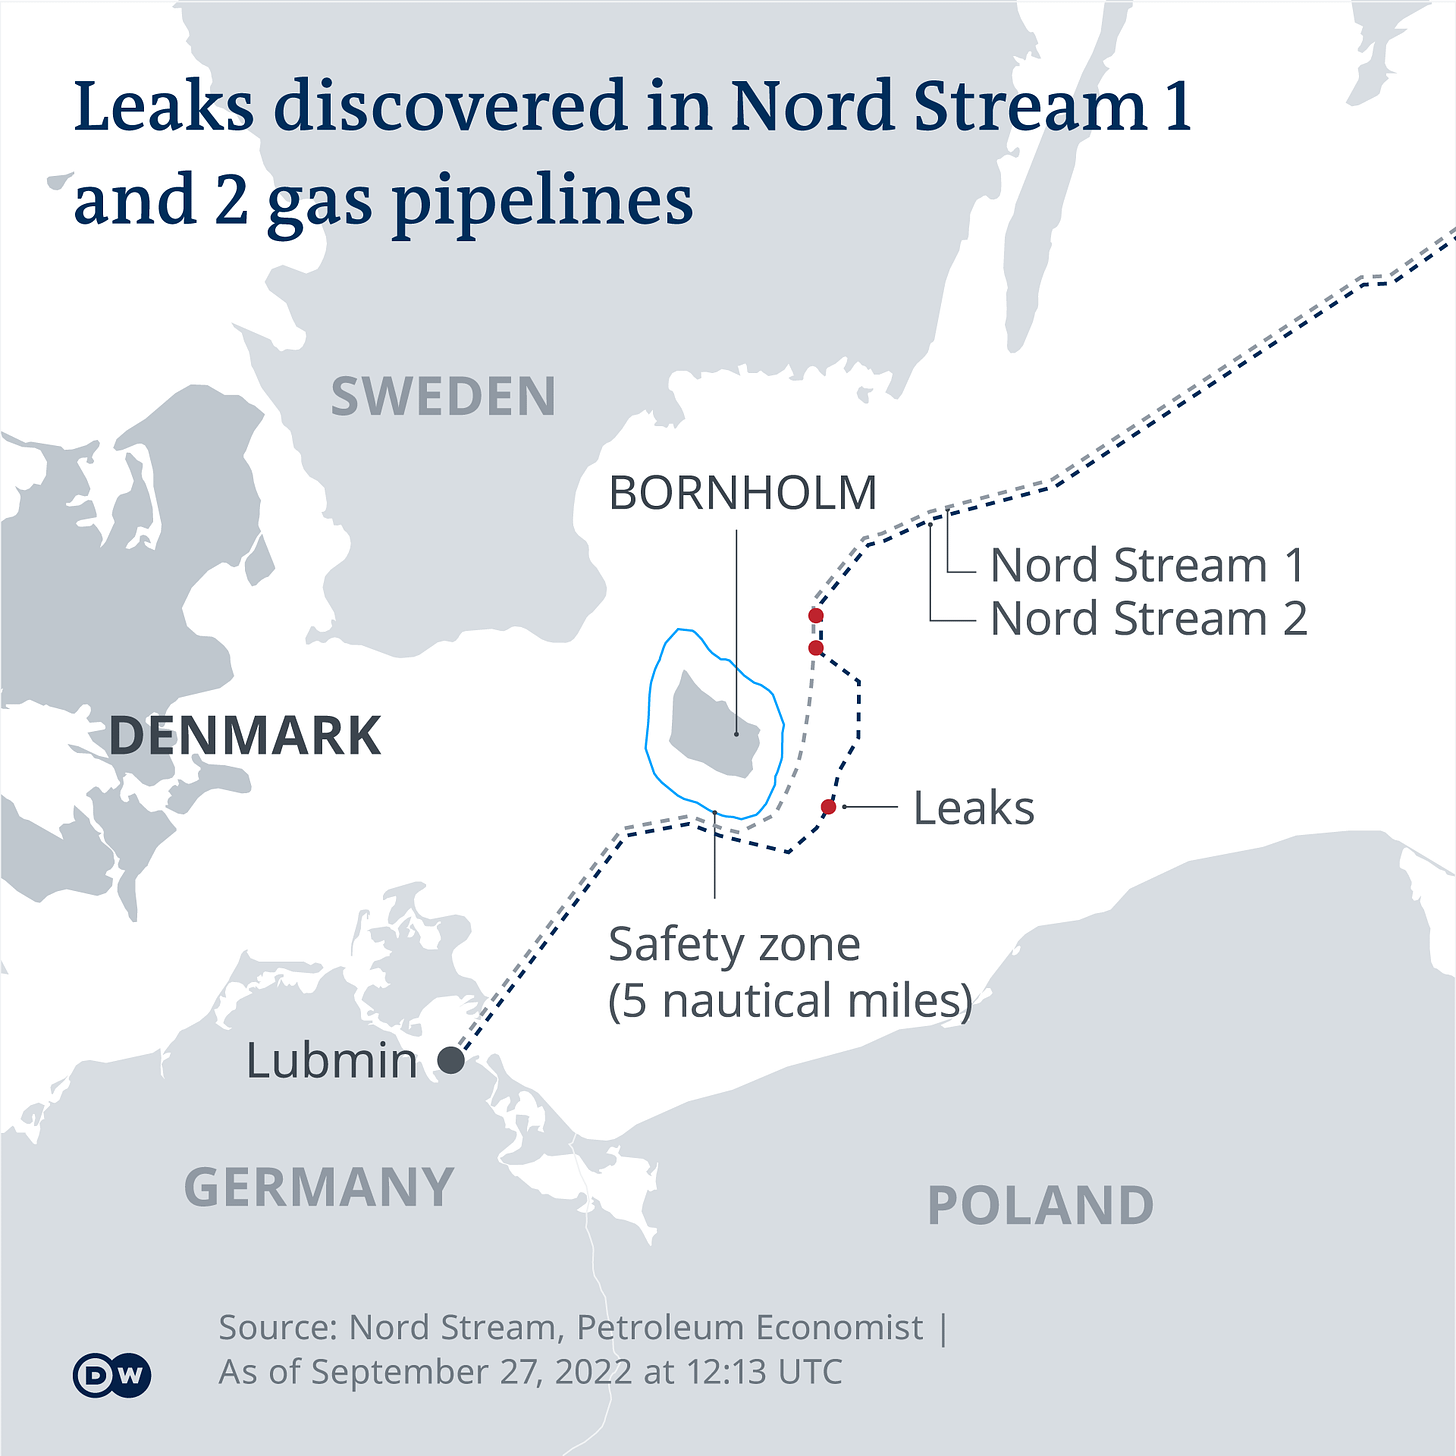 Map showing the areas where the nordstream 1 and 2 pipelines have leaked